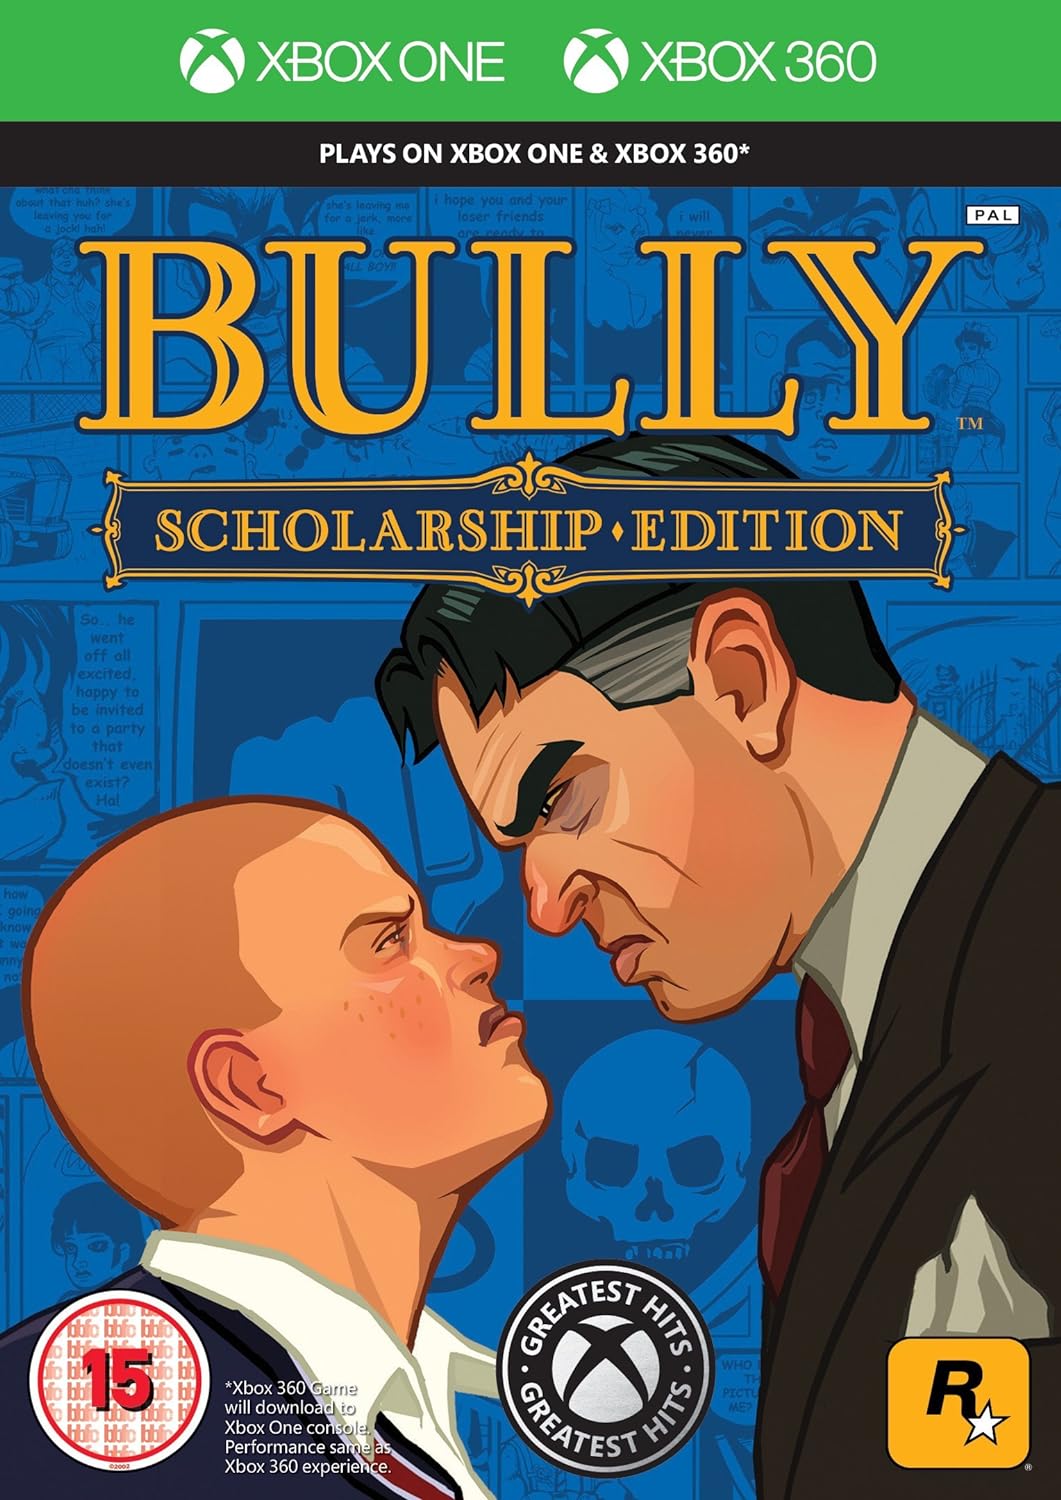 Bully: Scholarship Edition - Xbox one and Xbox 360